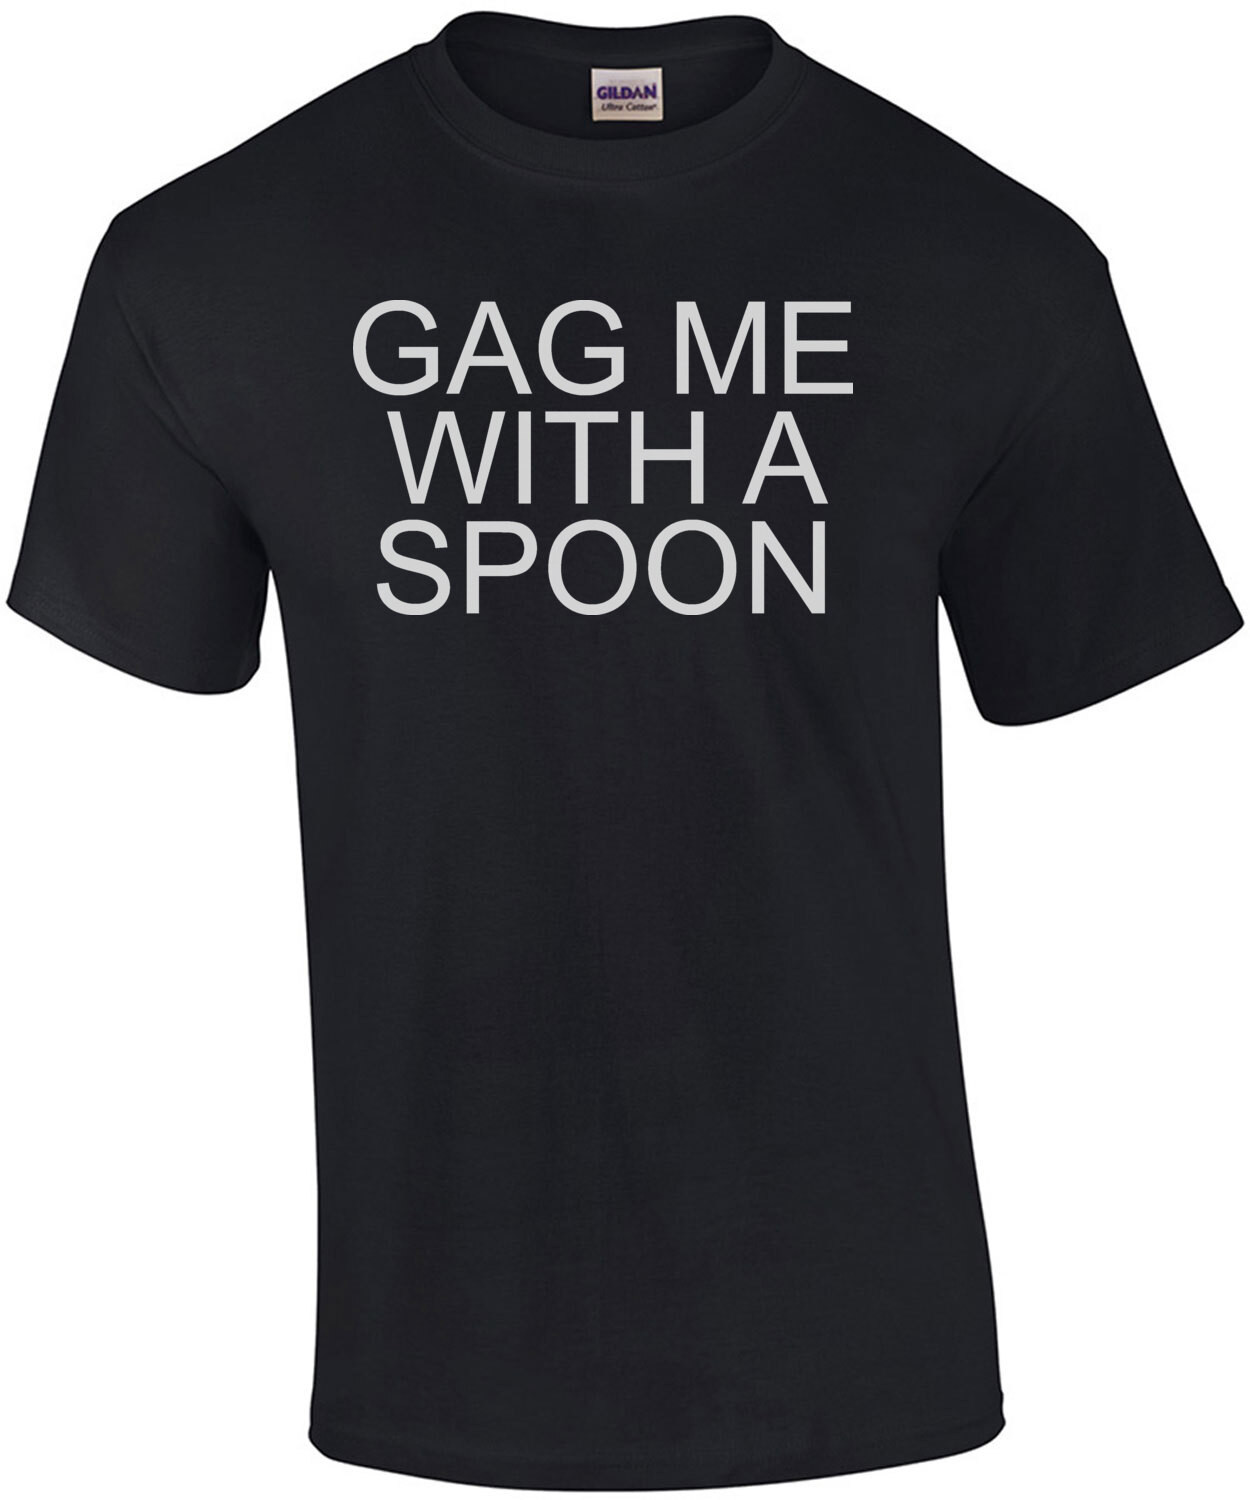 Gag Me With A Spoon - Valley Girl 80's T-Shirt